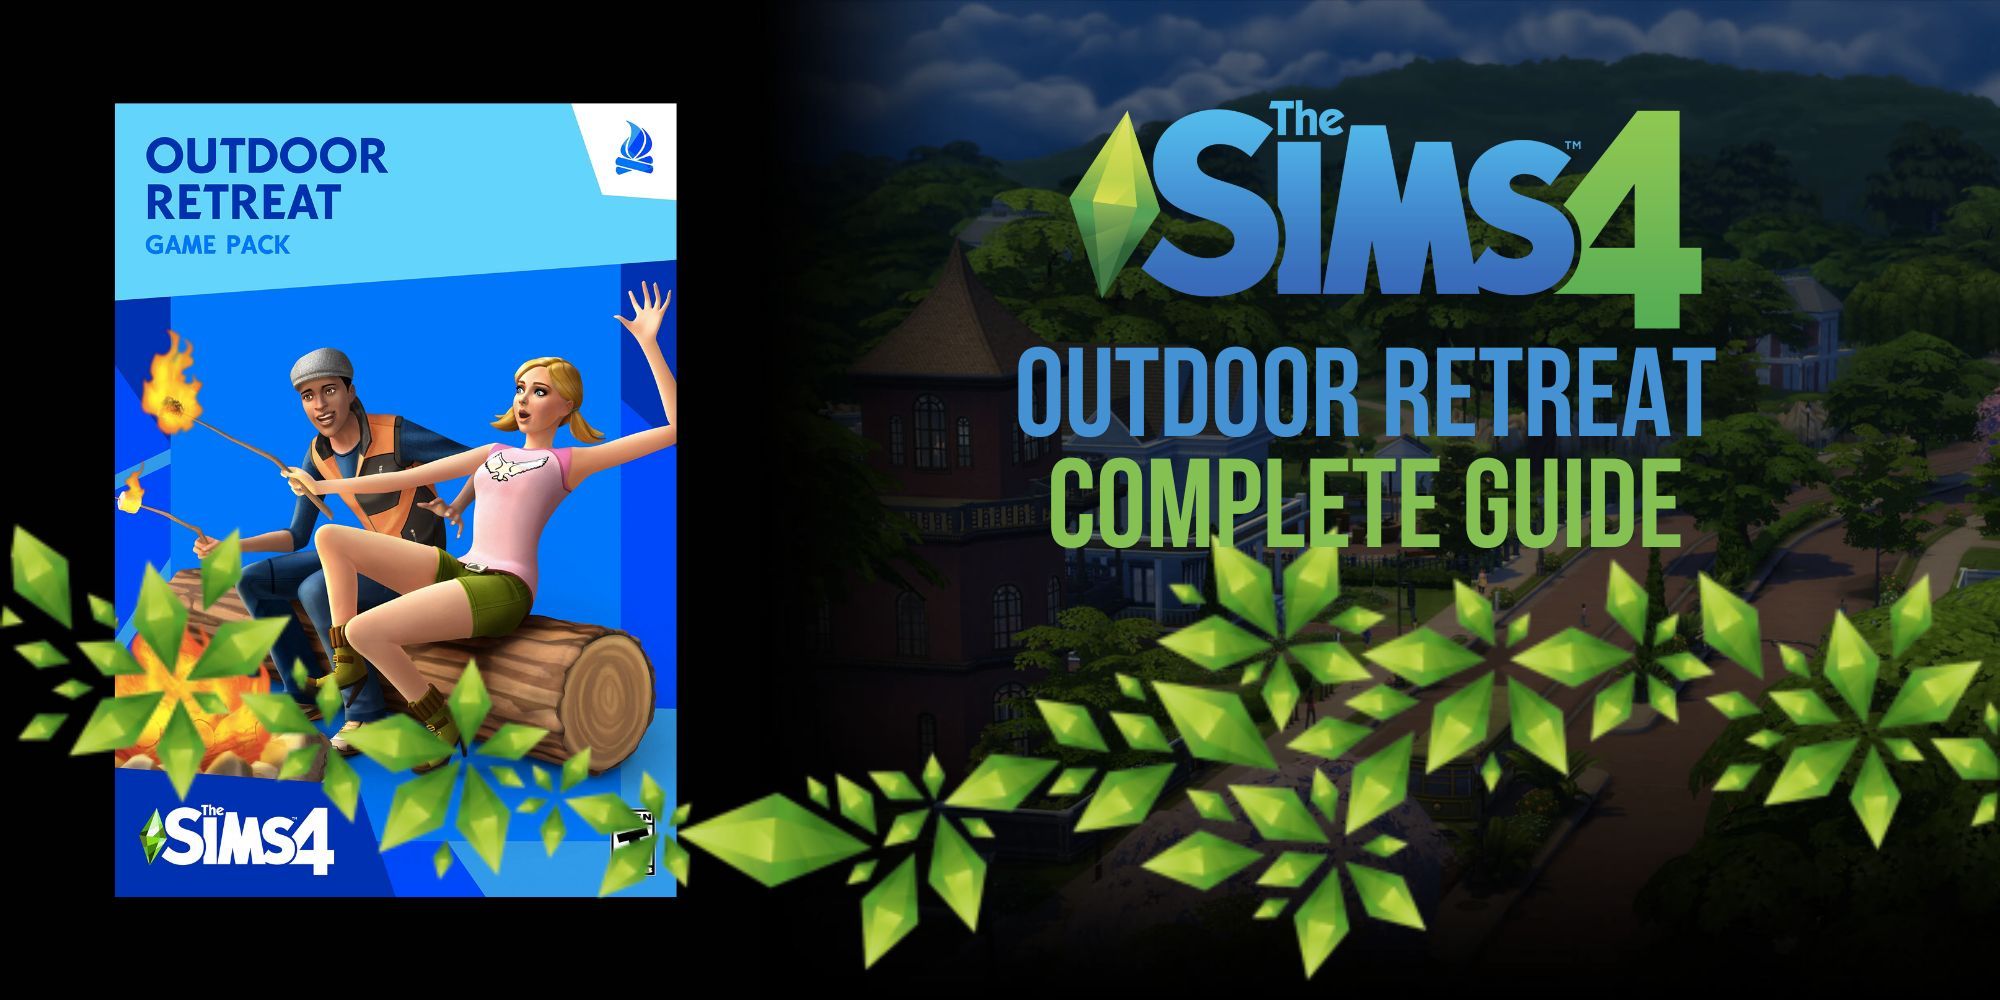 The Sims 4 Outdoor Retreat Complete Guide